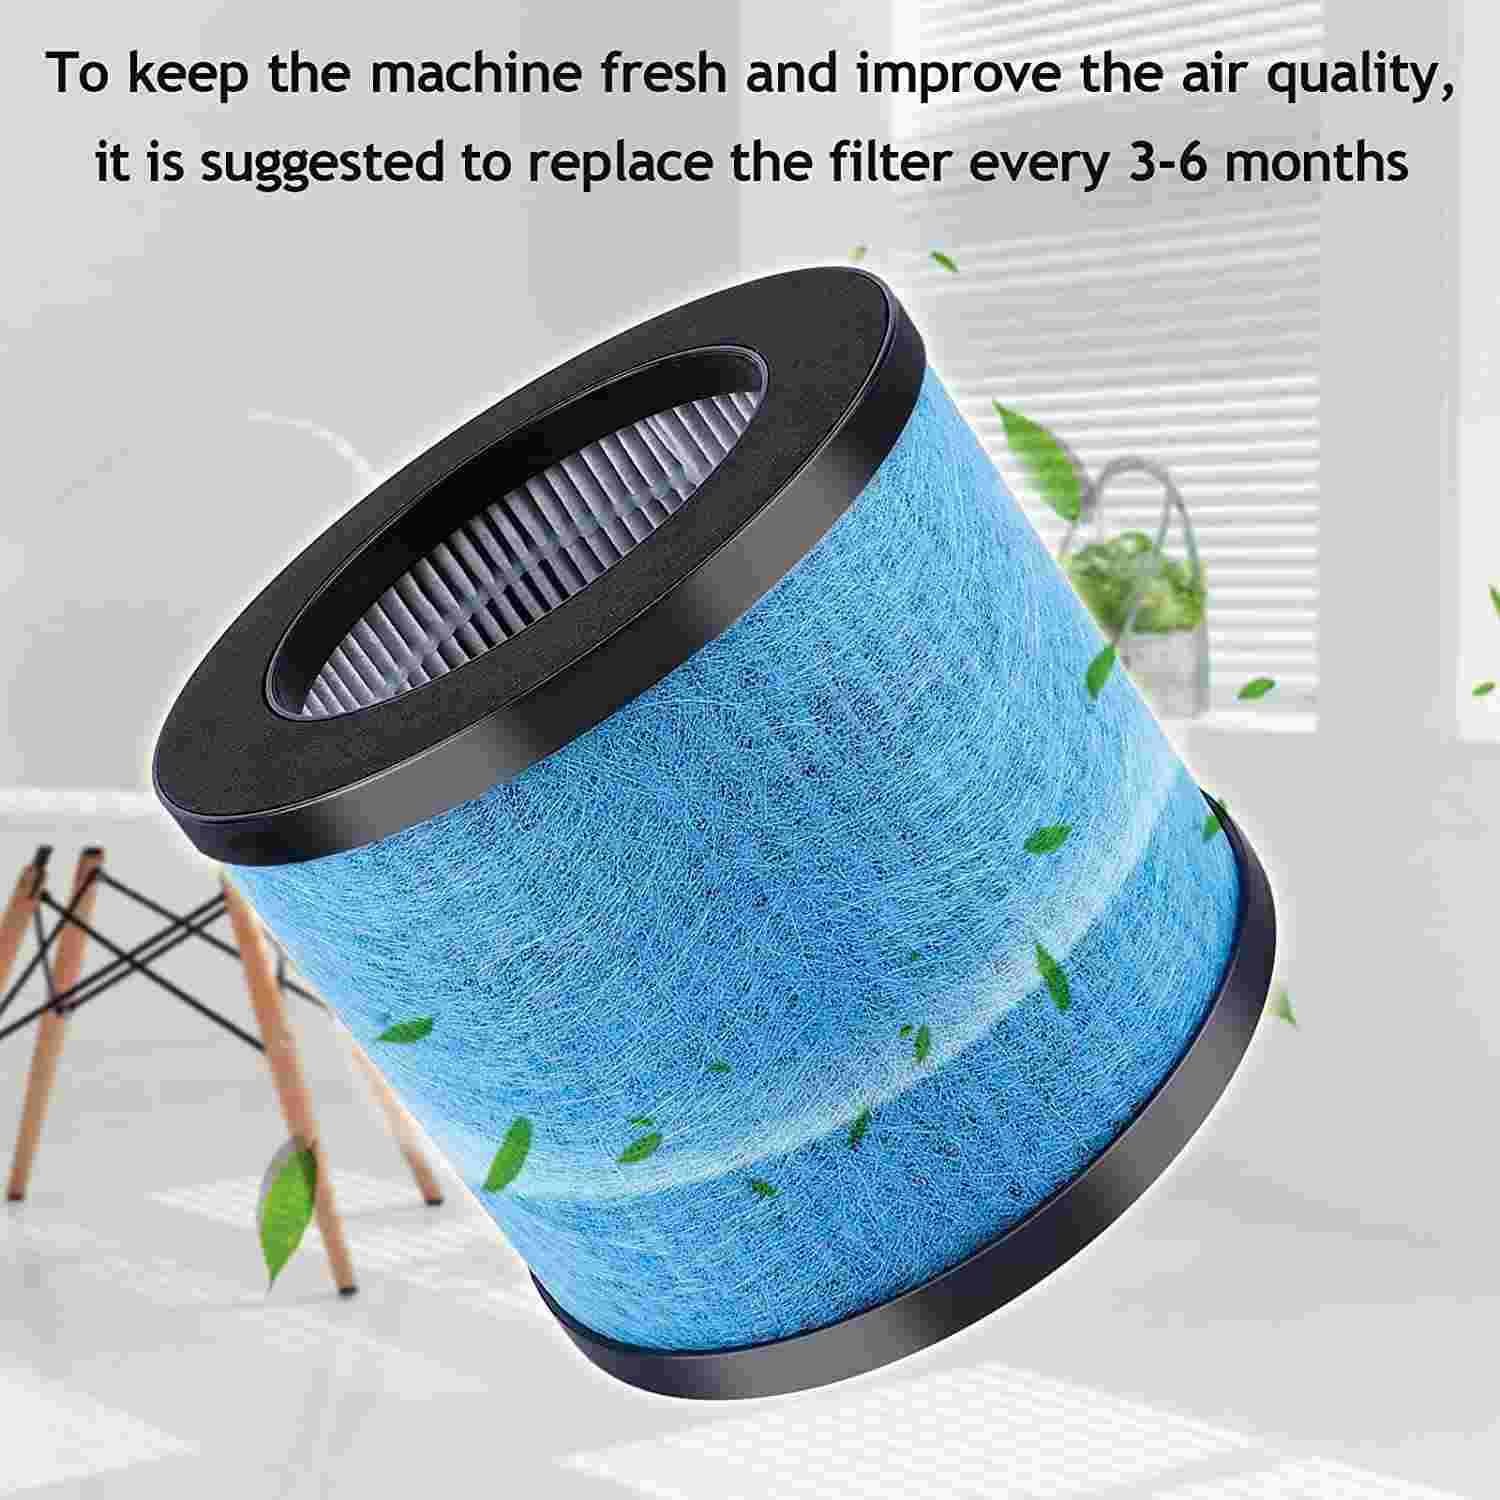 KEEPOW Hepa Filter Replacement for TOPPIN TPAP002 HEPA Air Purifier Comfy Air C1, Part # TPFF002 (2 Pack)